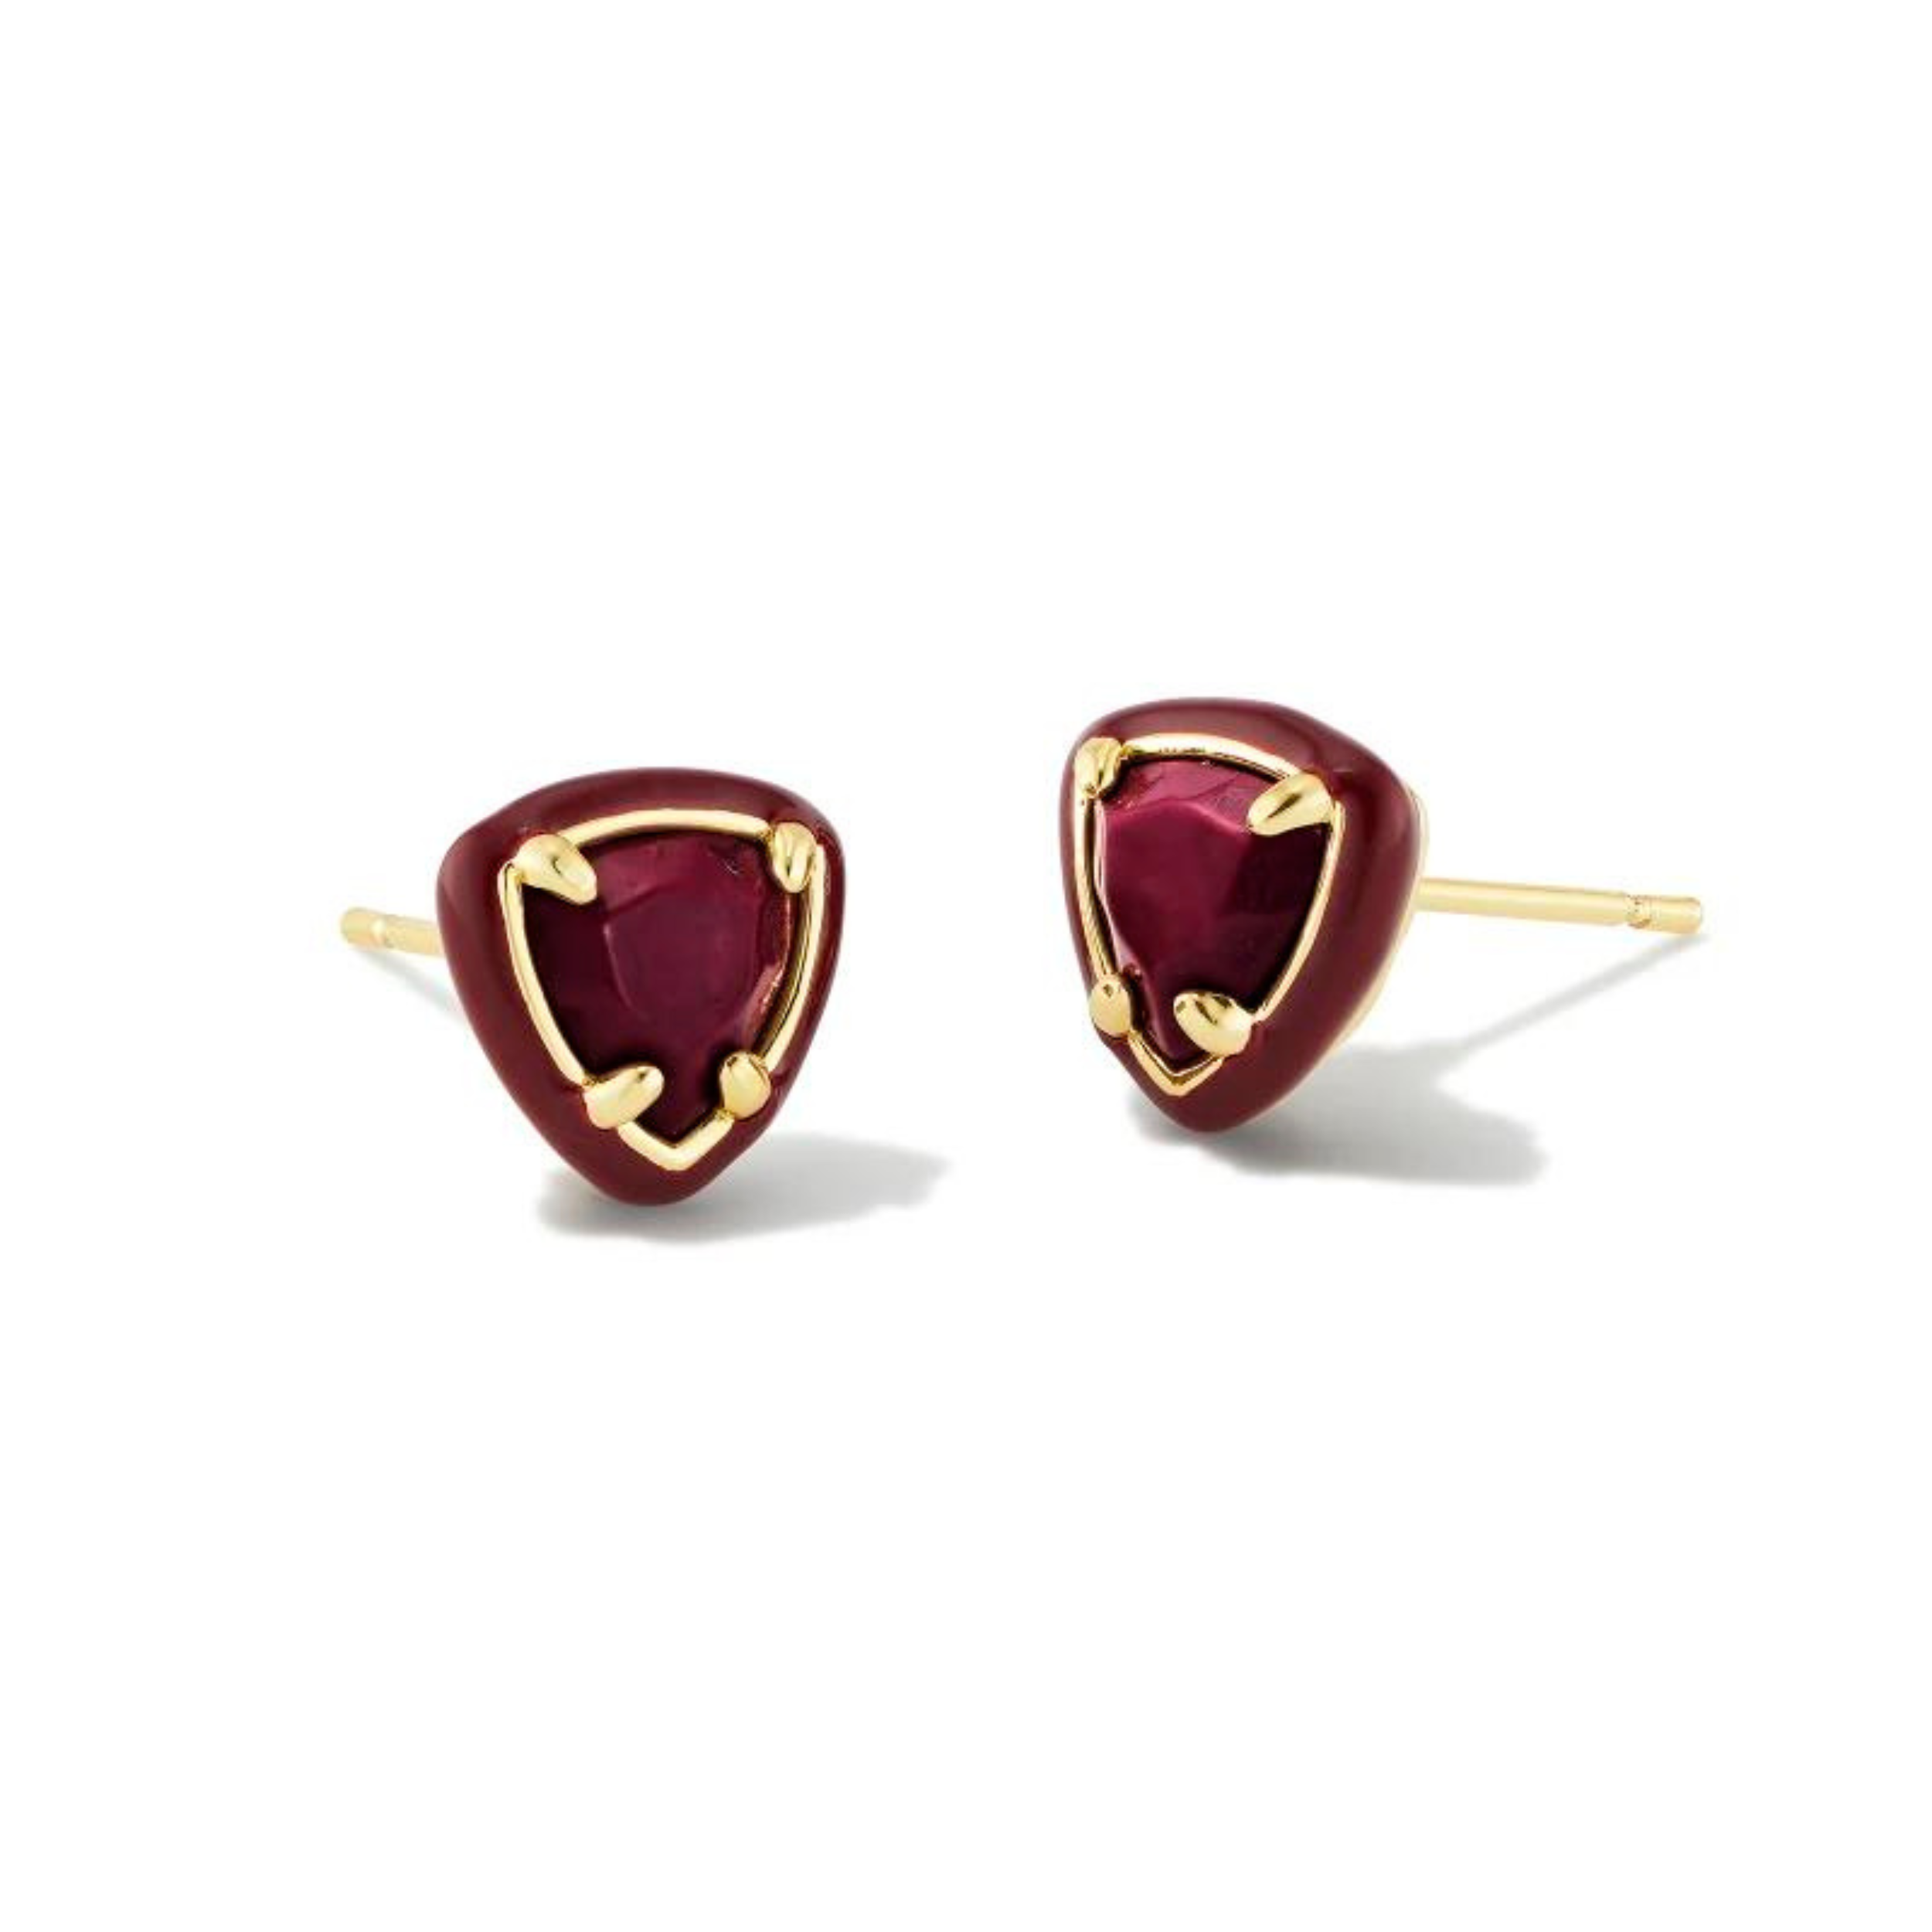 Maroon framed, triangle shaped stud earrings with a center maroon stone and a gold ear post. These earrings are pictured on a white background. 